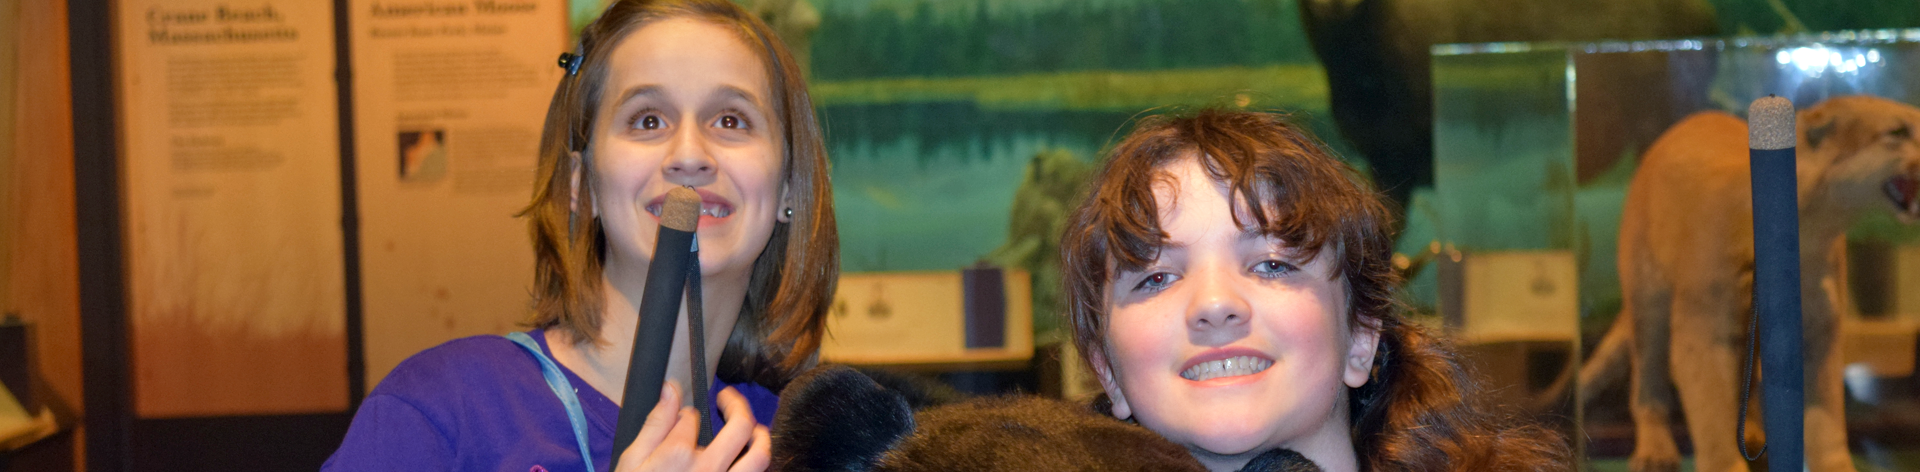 Two blind girls smile together at a museum.